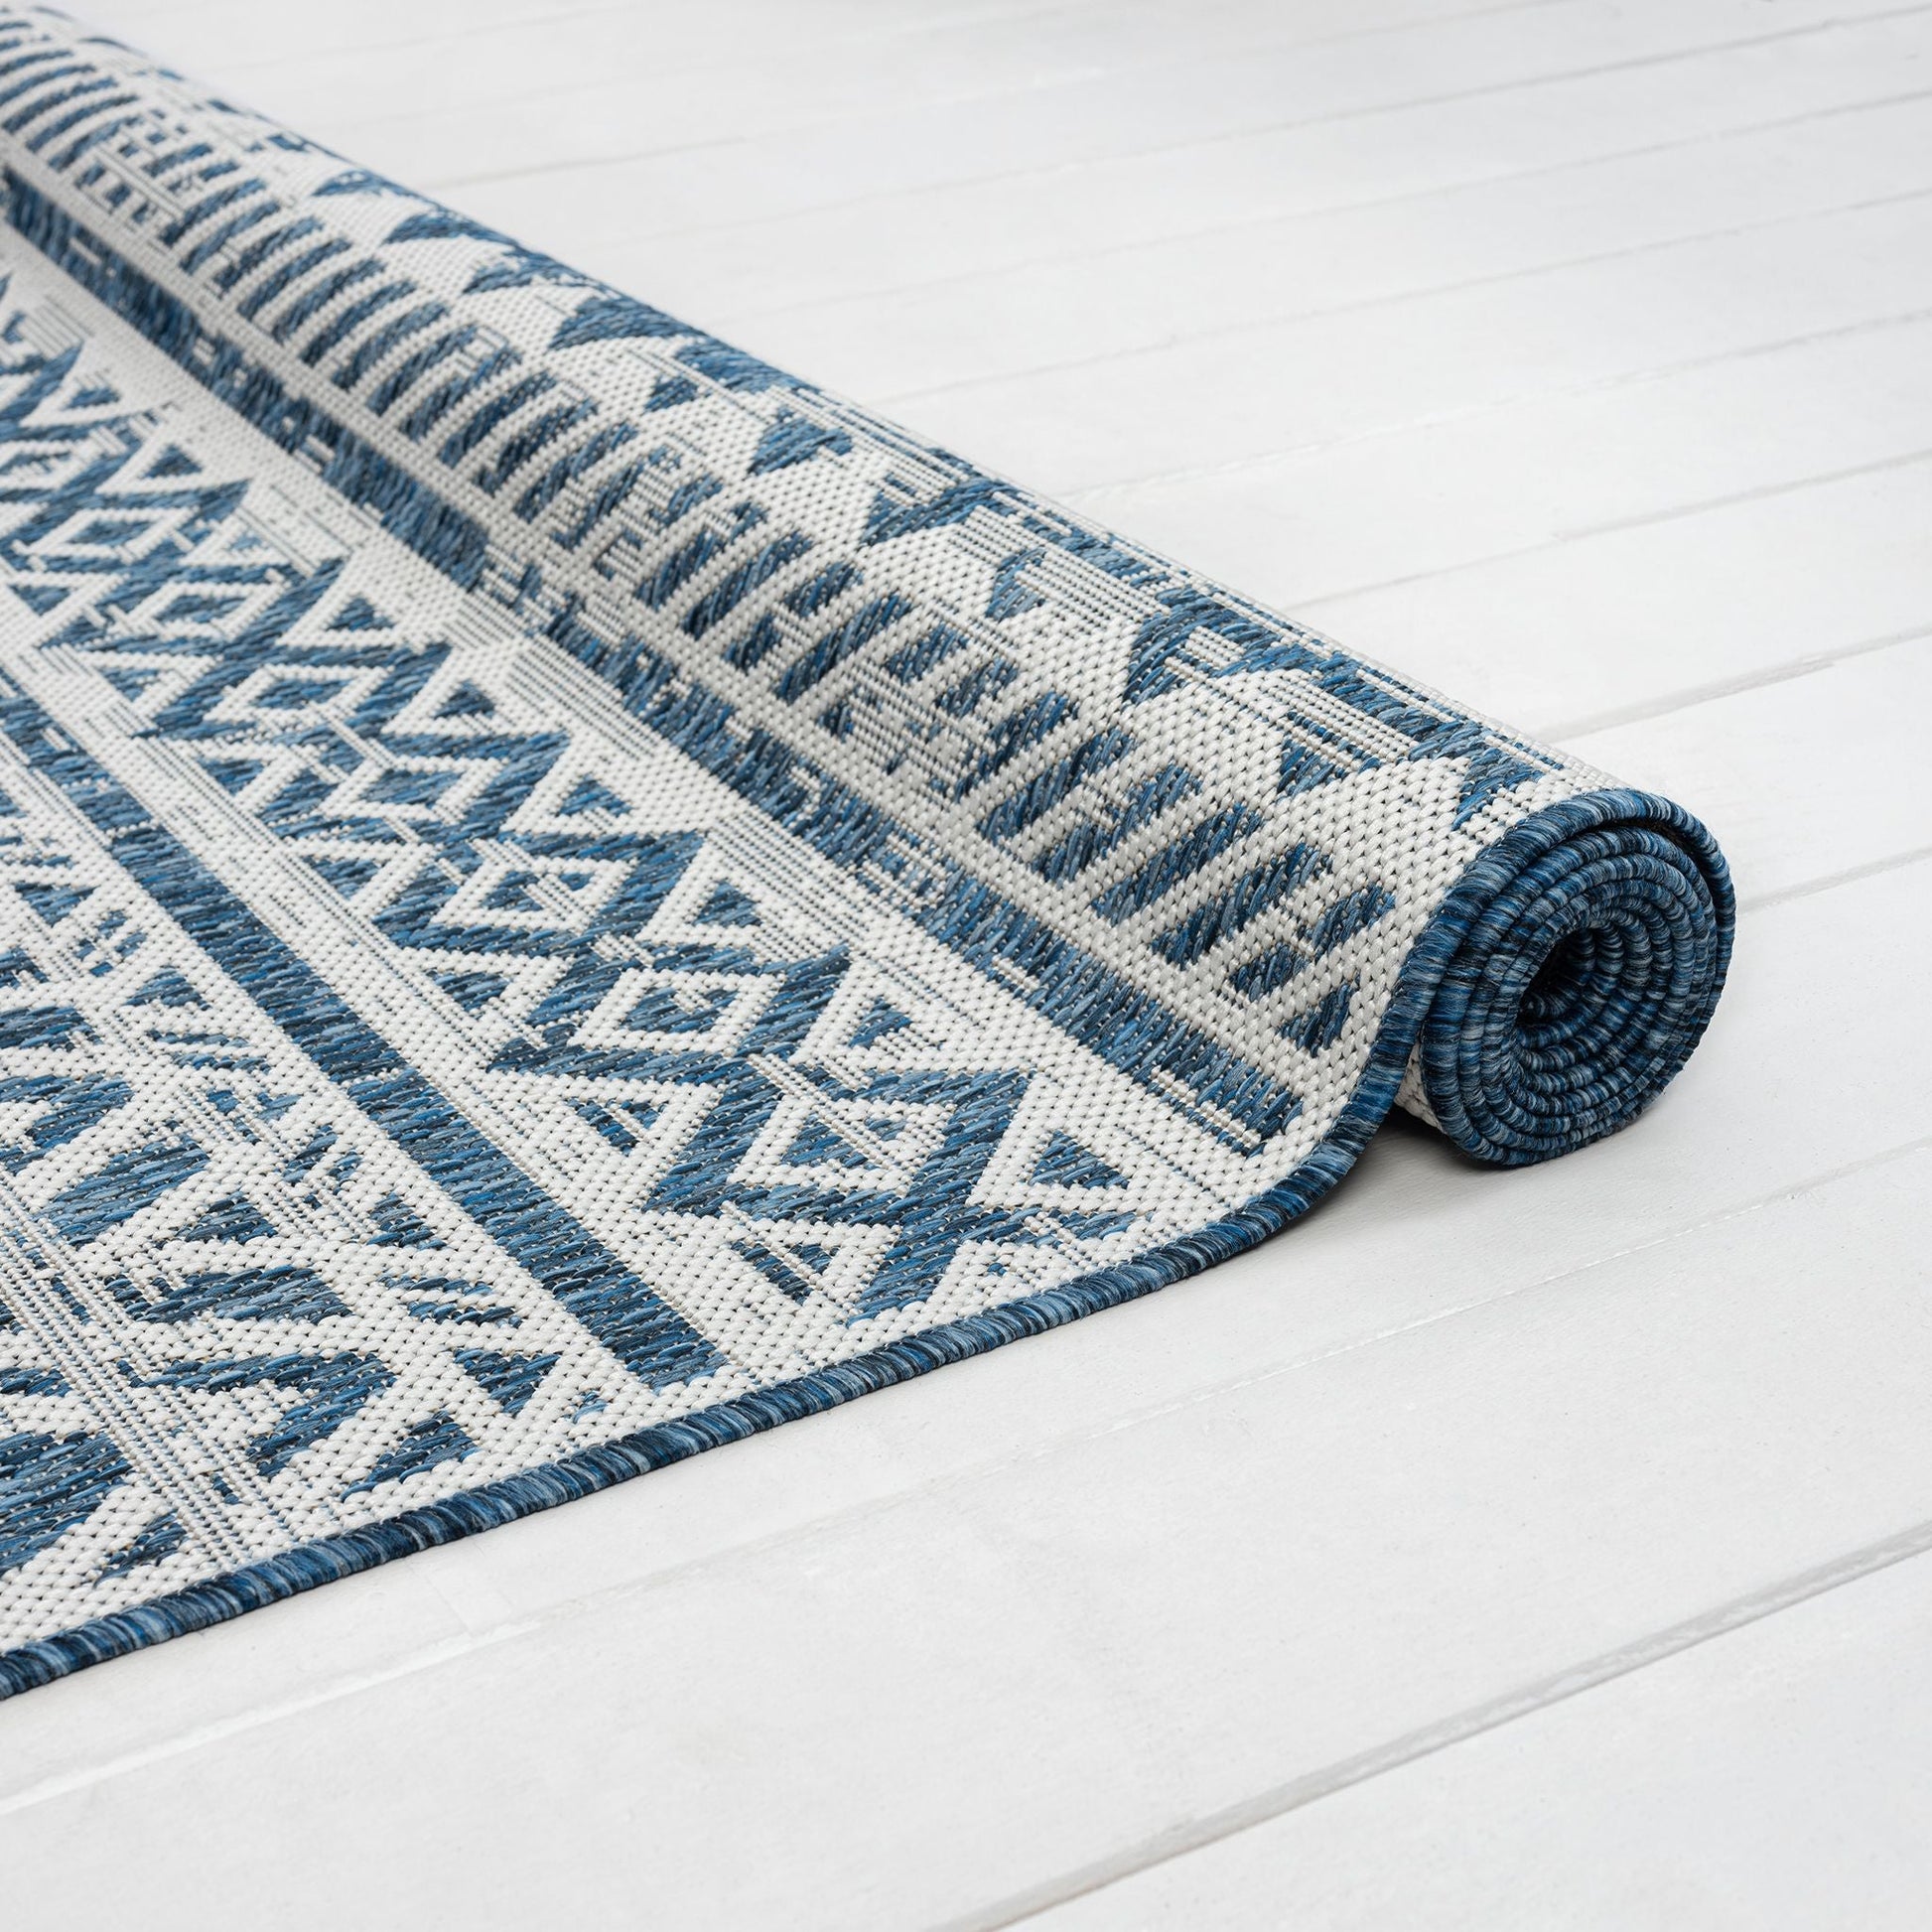 Patio 453 Frost Saray Rugs